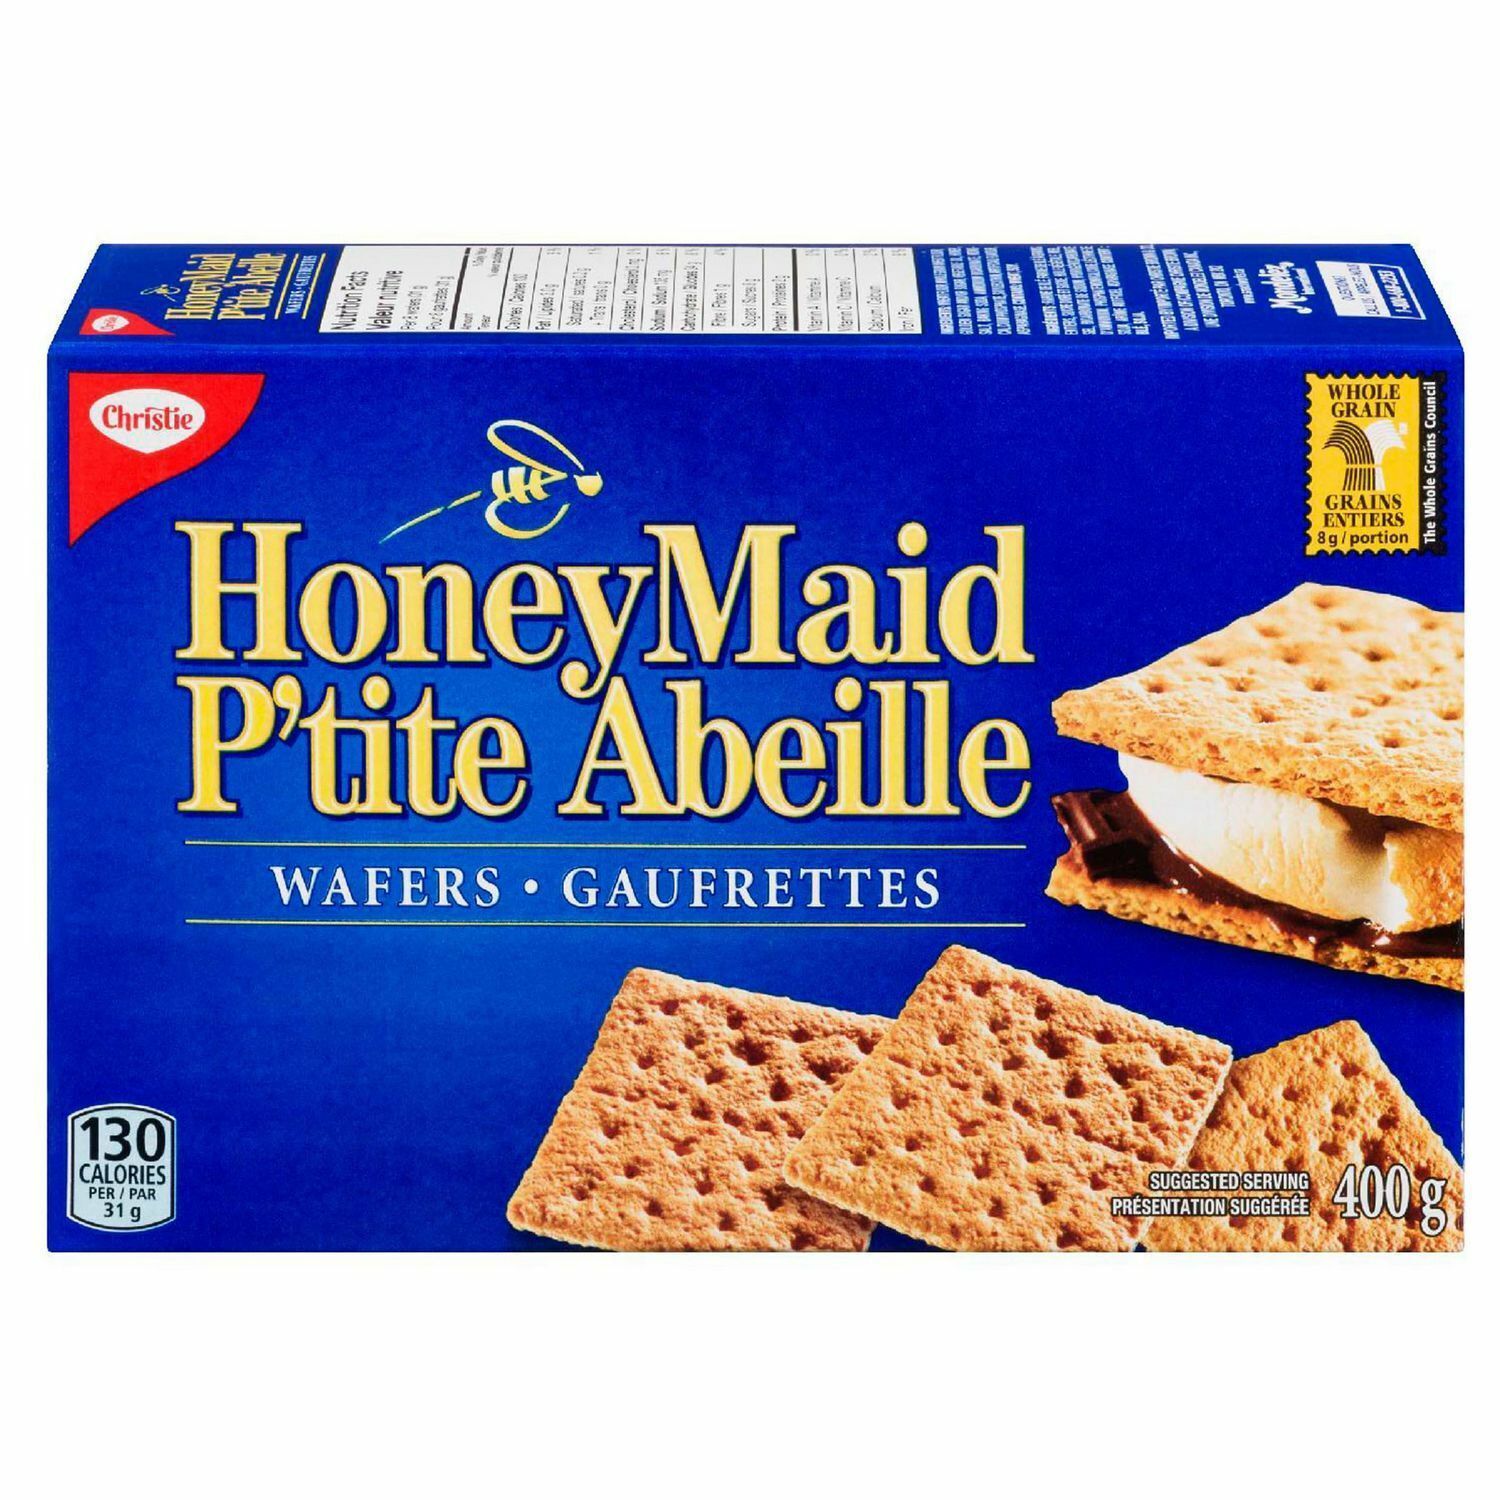 2 Boxes of HONEYMAID Graham Wafers 400 g Each, from Canada, FREE SHIPPING - $27.09